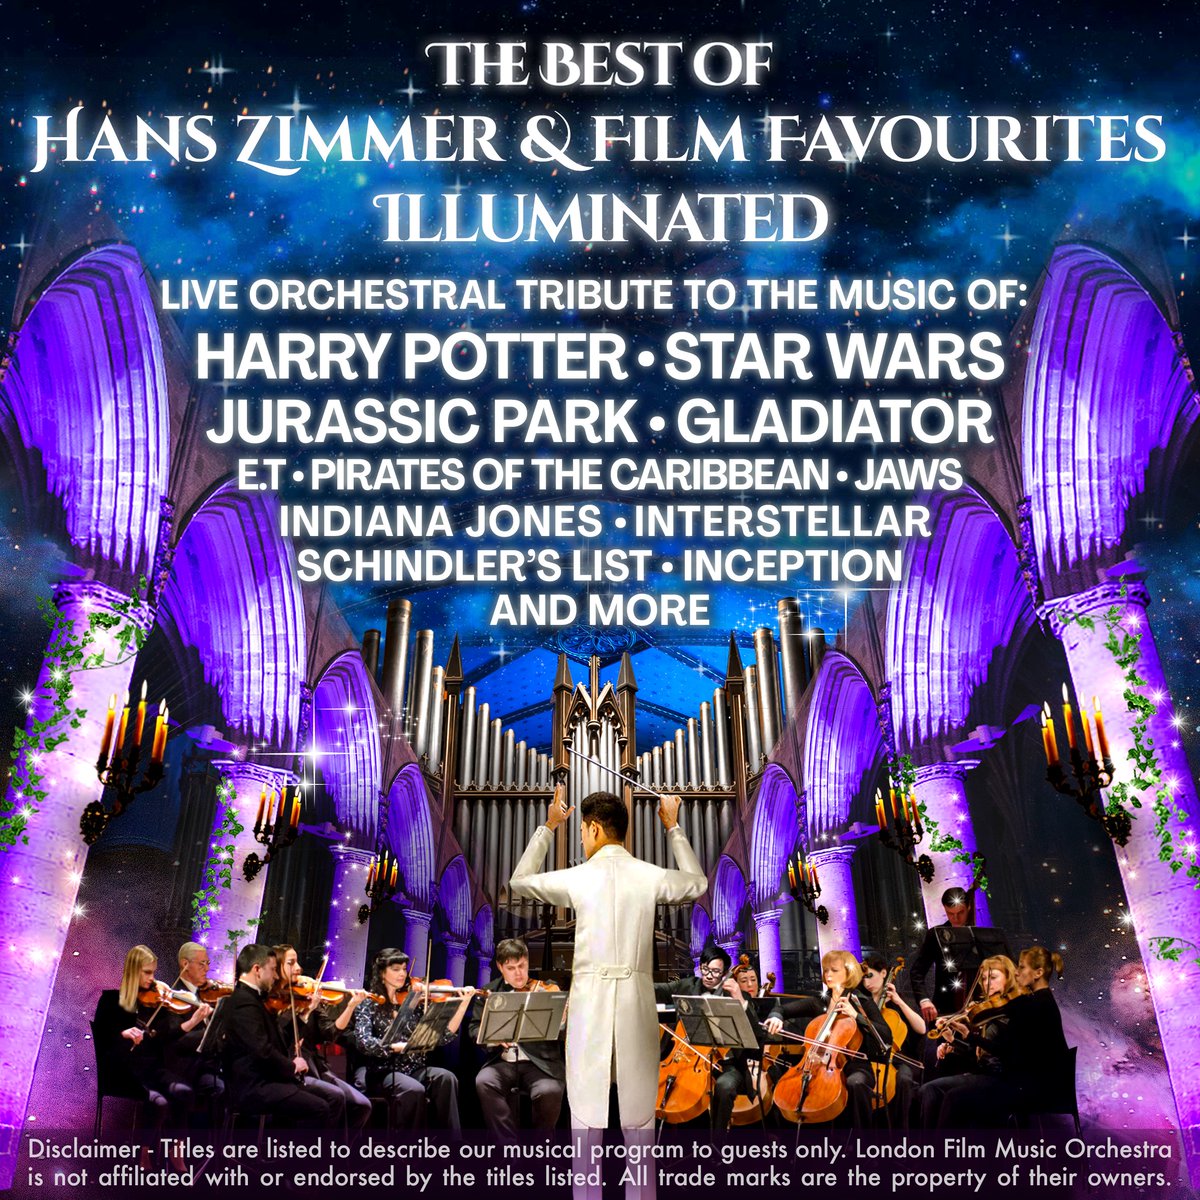 We have two last minute tickets available for The Best of Hans Zimmer & Film Favourites Illuminated tonight at 7:30pm! Hurry, these tickets will be snapped up. 01305 783 225 weymouthpavilion.com/shows/the-best…